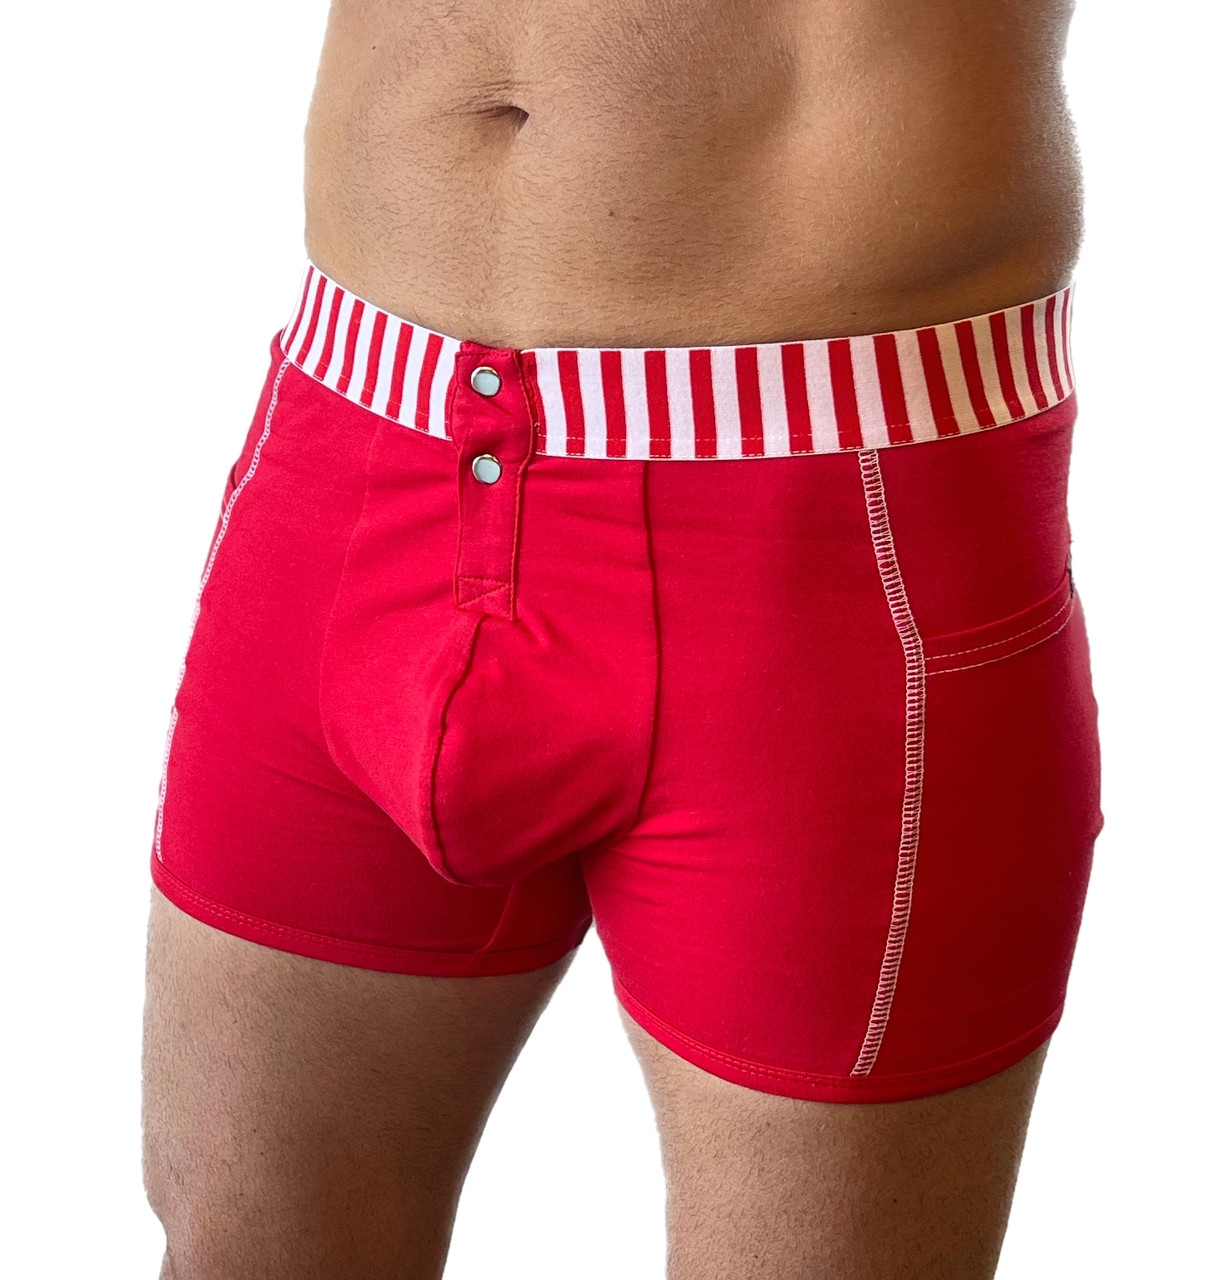 FOXERS Red Men's Boxer Brief with Pockets & Red/White Stripe Elastic Band